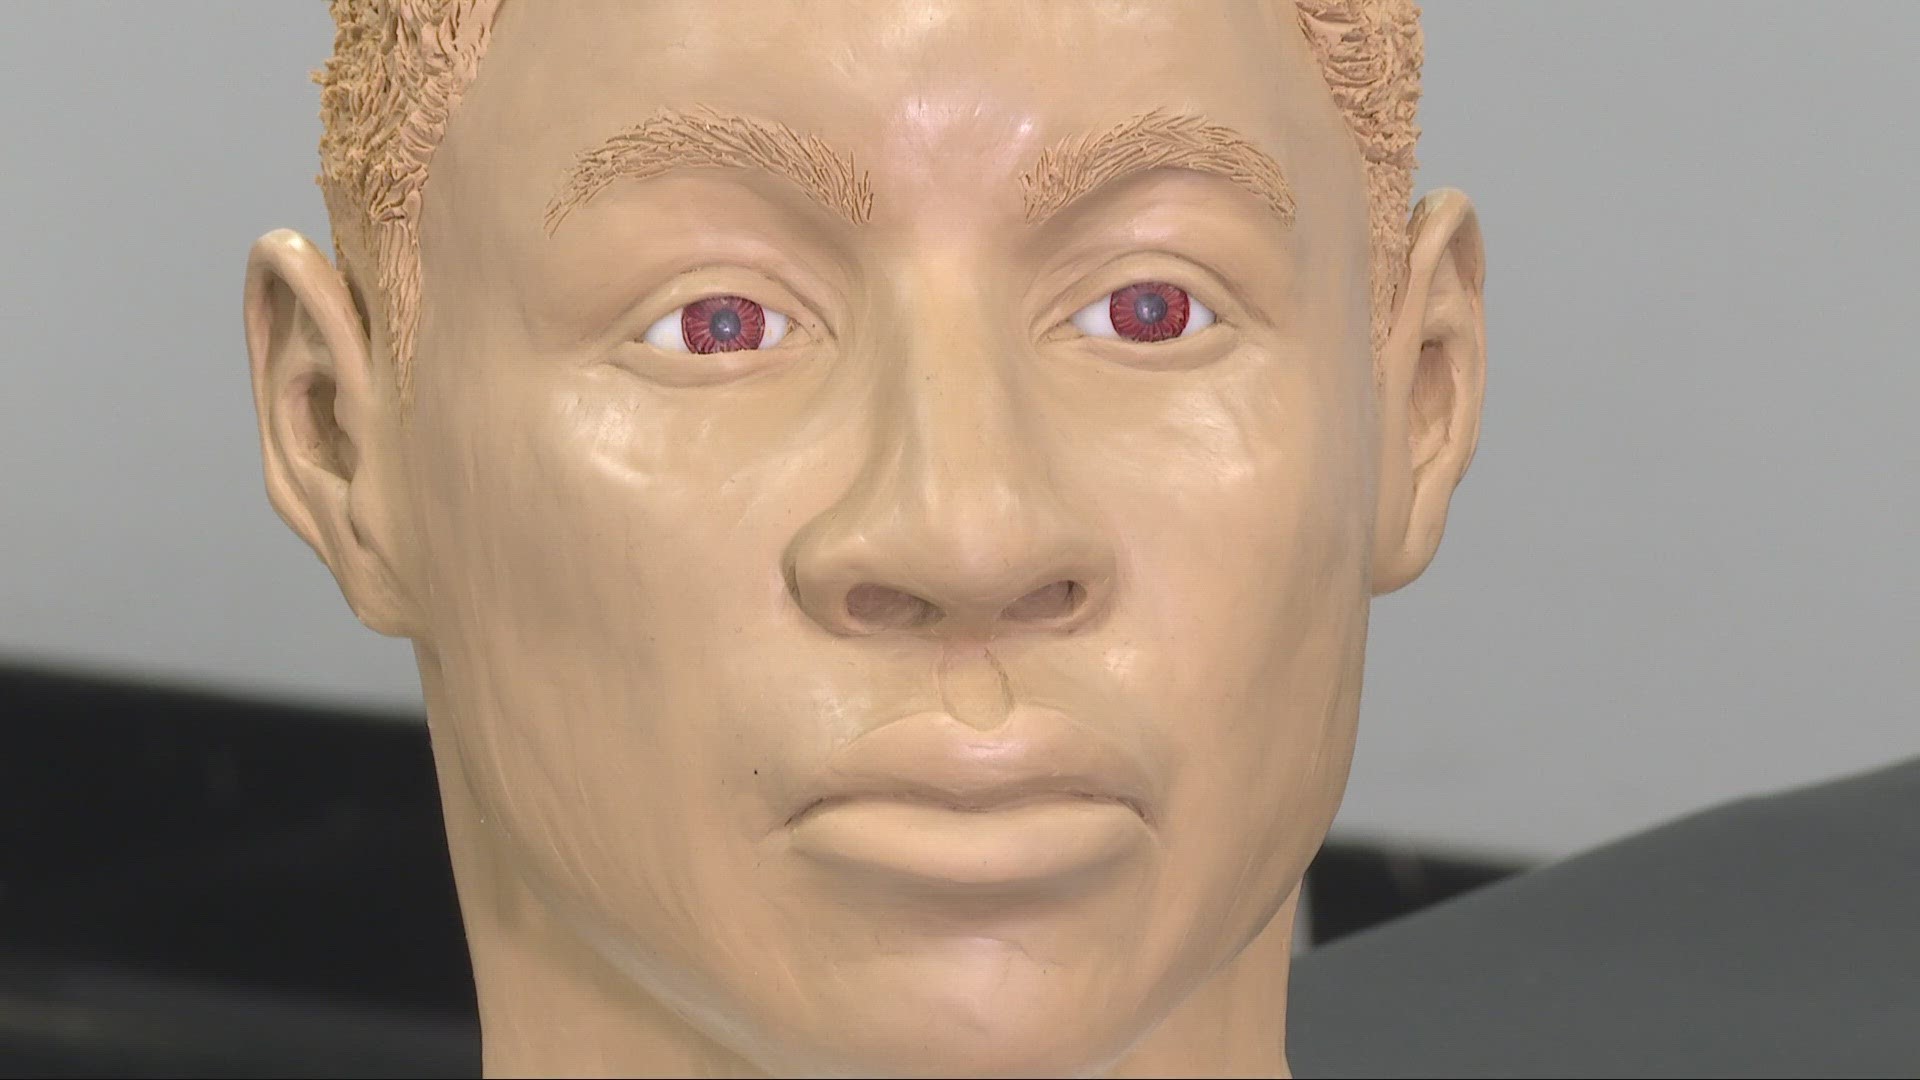 Forensic facial reconstruction for Canton John Doe case from 2001 wkyc picture